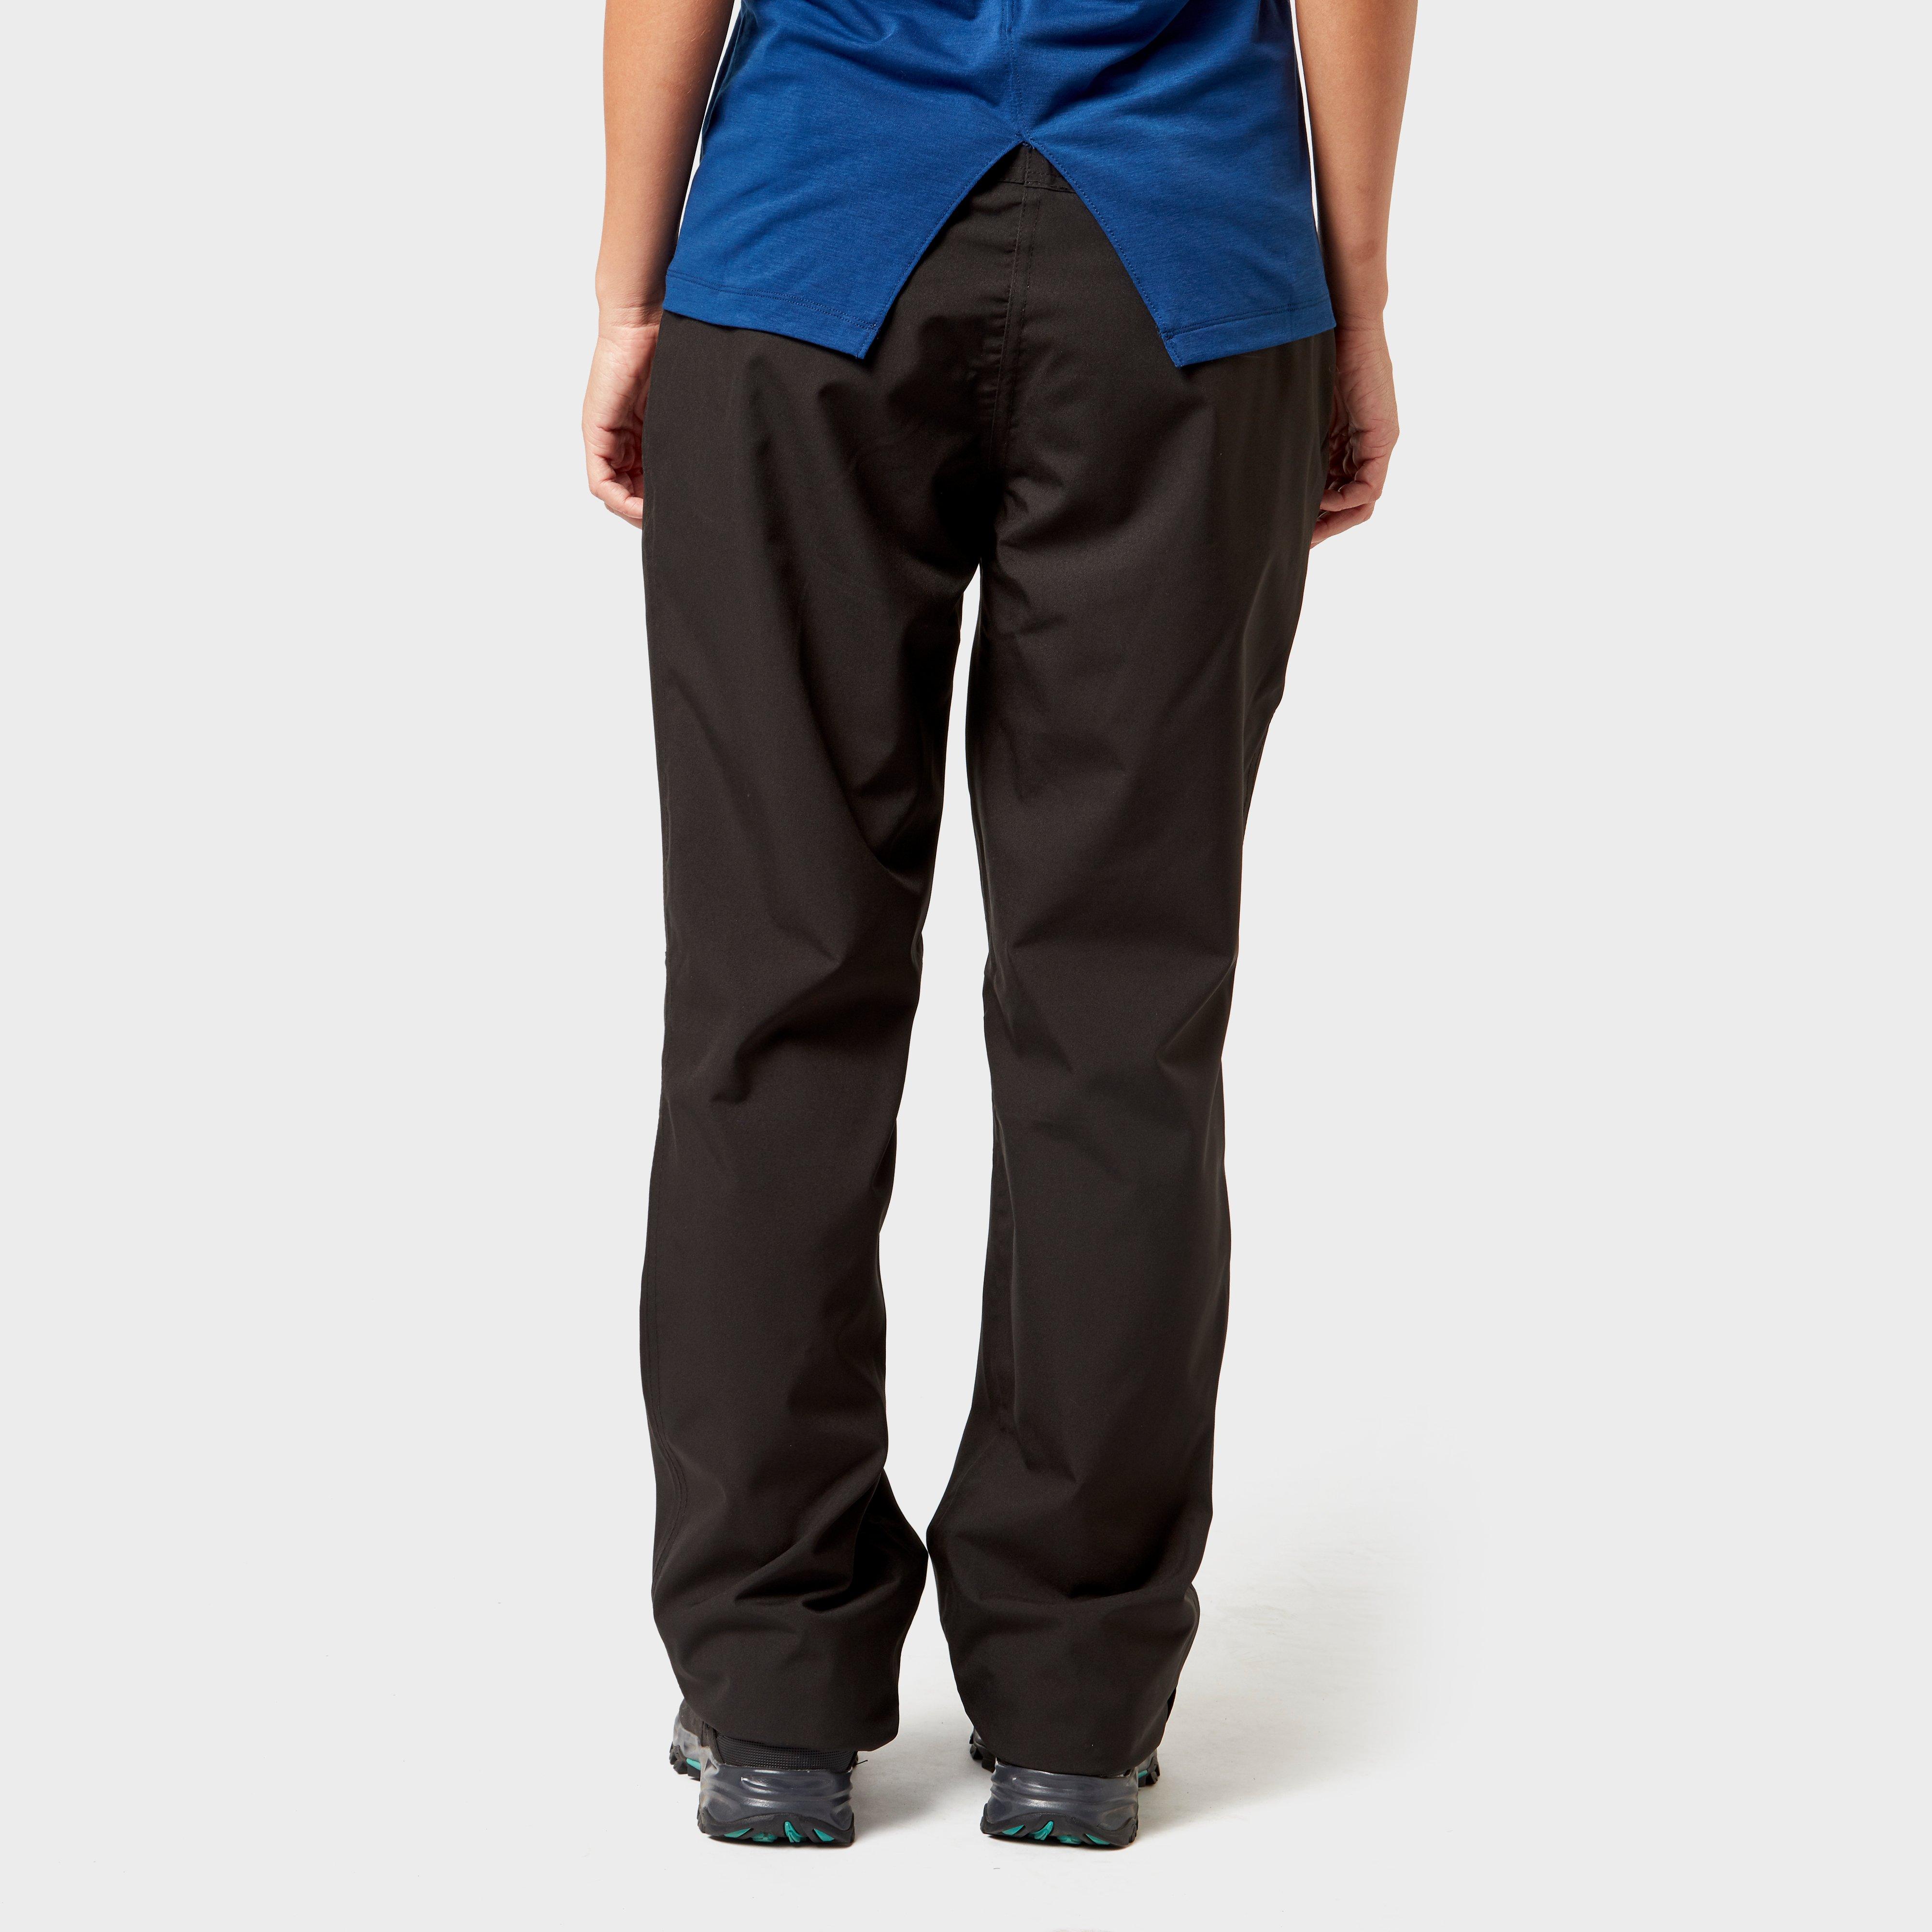 Craghoppers Ladies Airedale Waterproof Breathable Stretch Trousers 